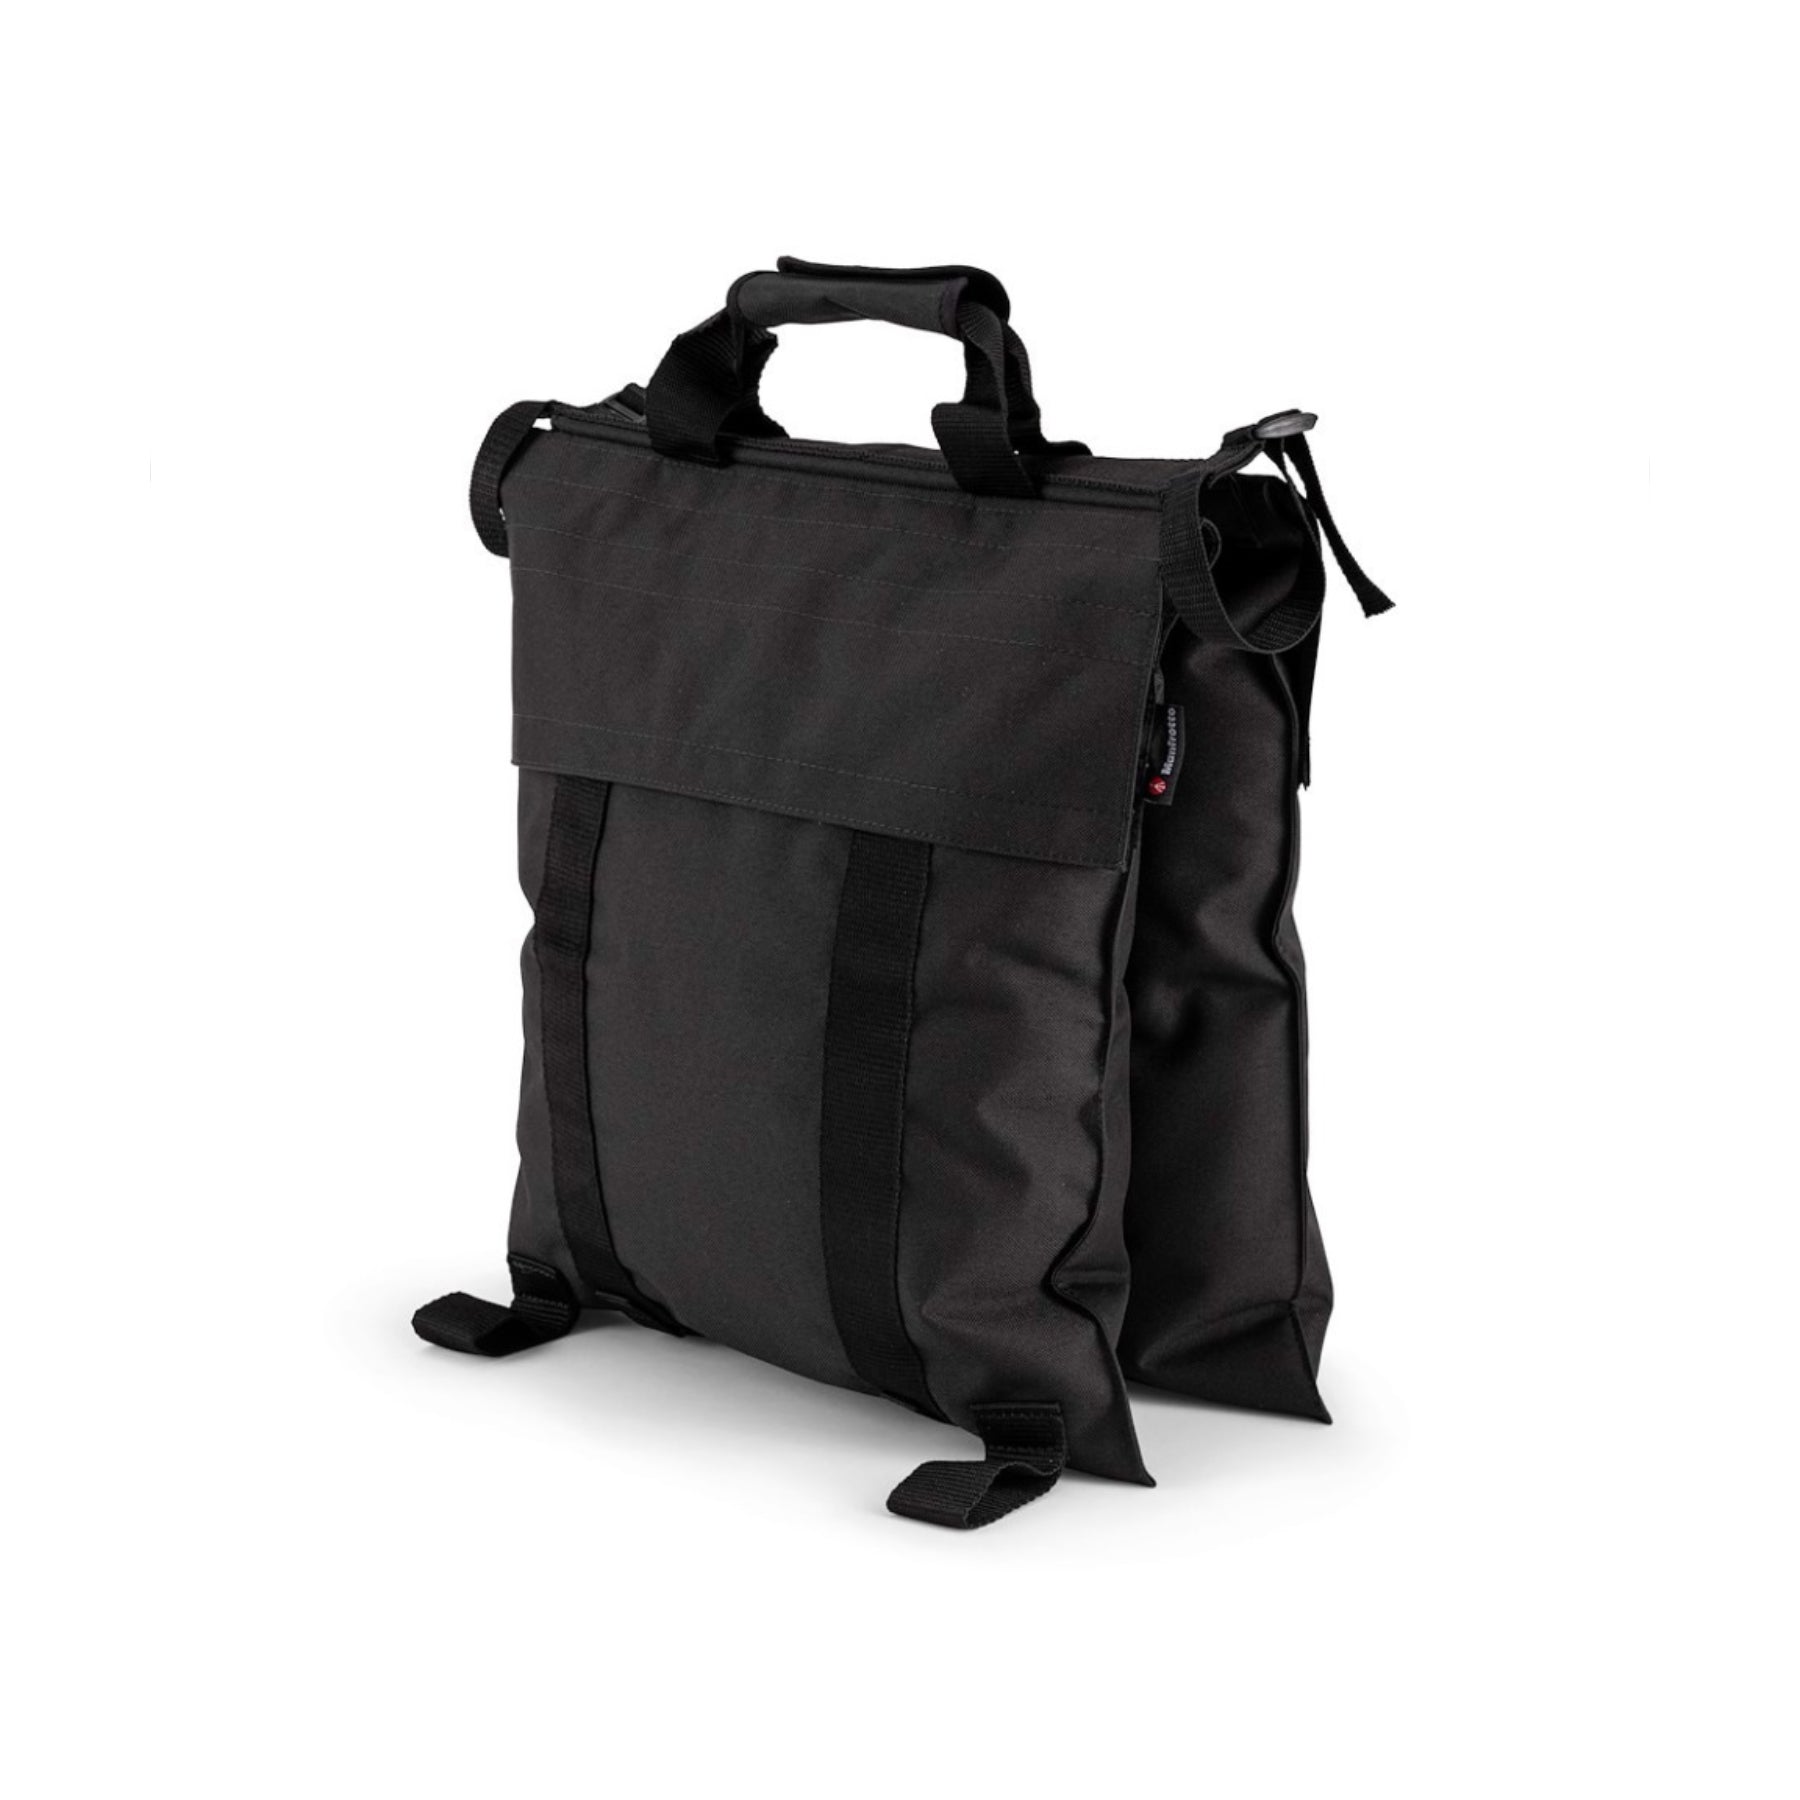 Buy Manfrotto Sand Bag large 35 Kg at Topic Store